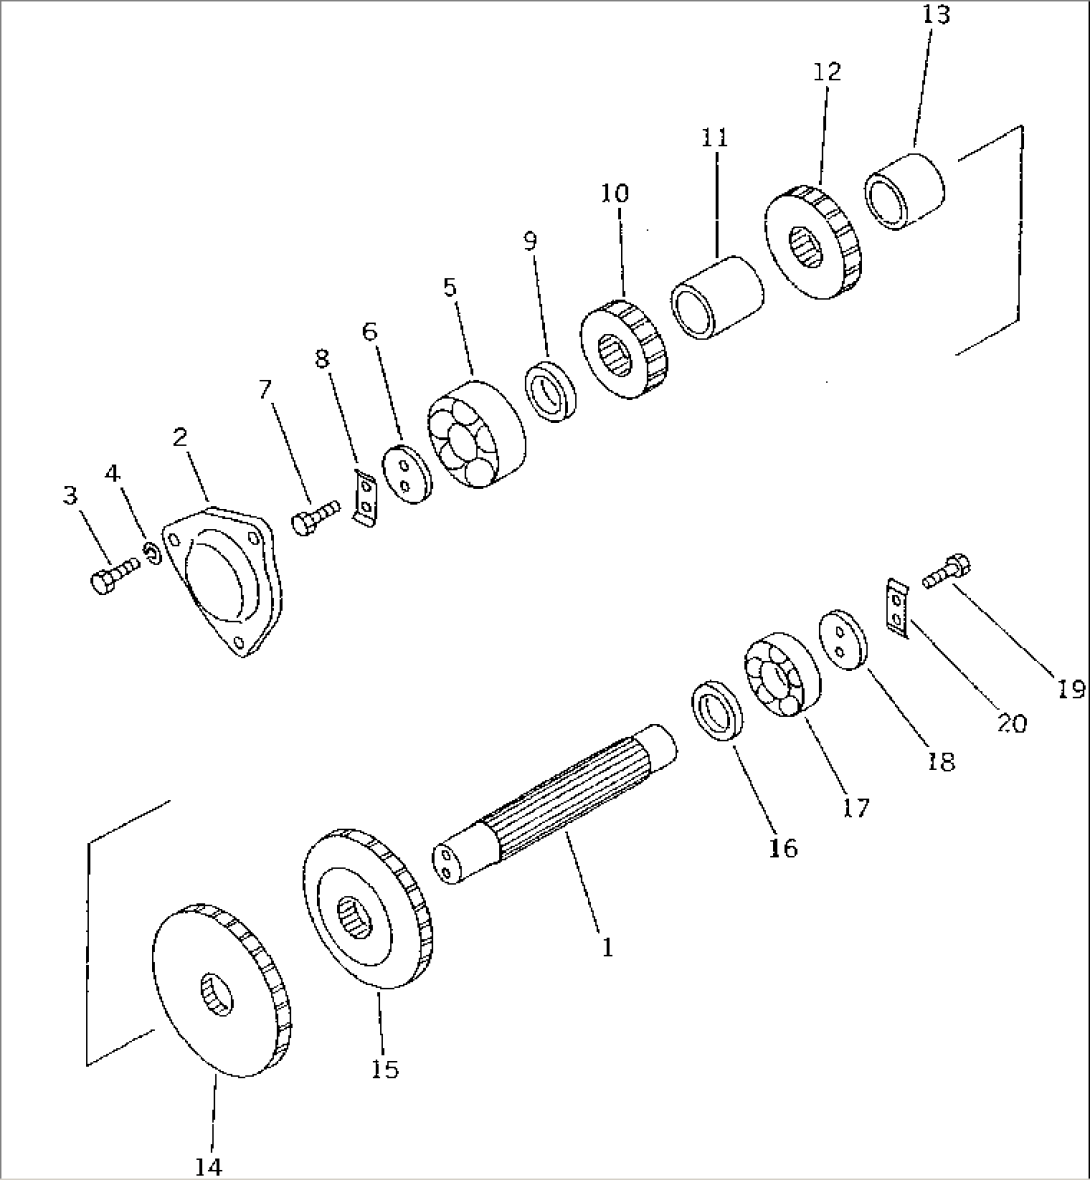 TRANSMISSION (INTERMEDIATE SHAFT AND GEAR) (3/5) (WIHTOUT BACK-UP SWITCH)